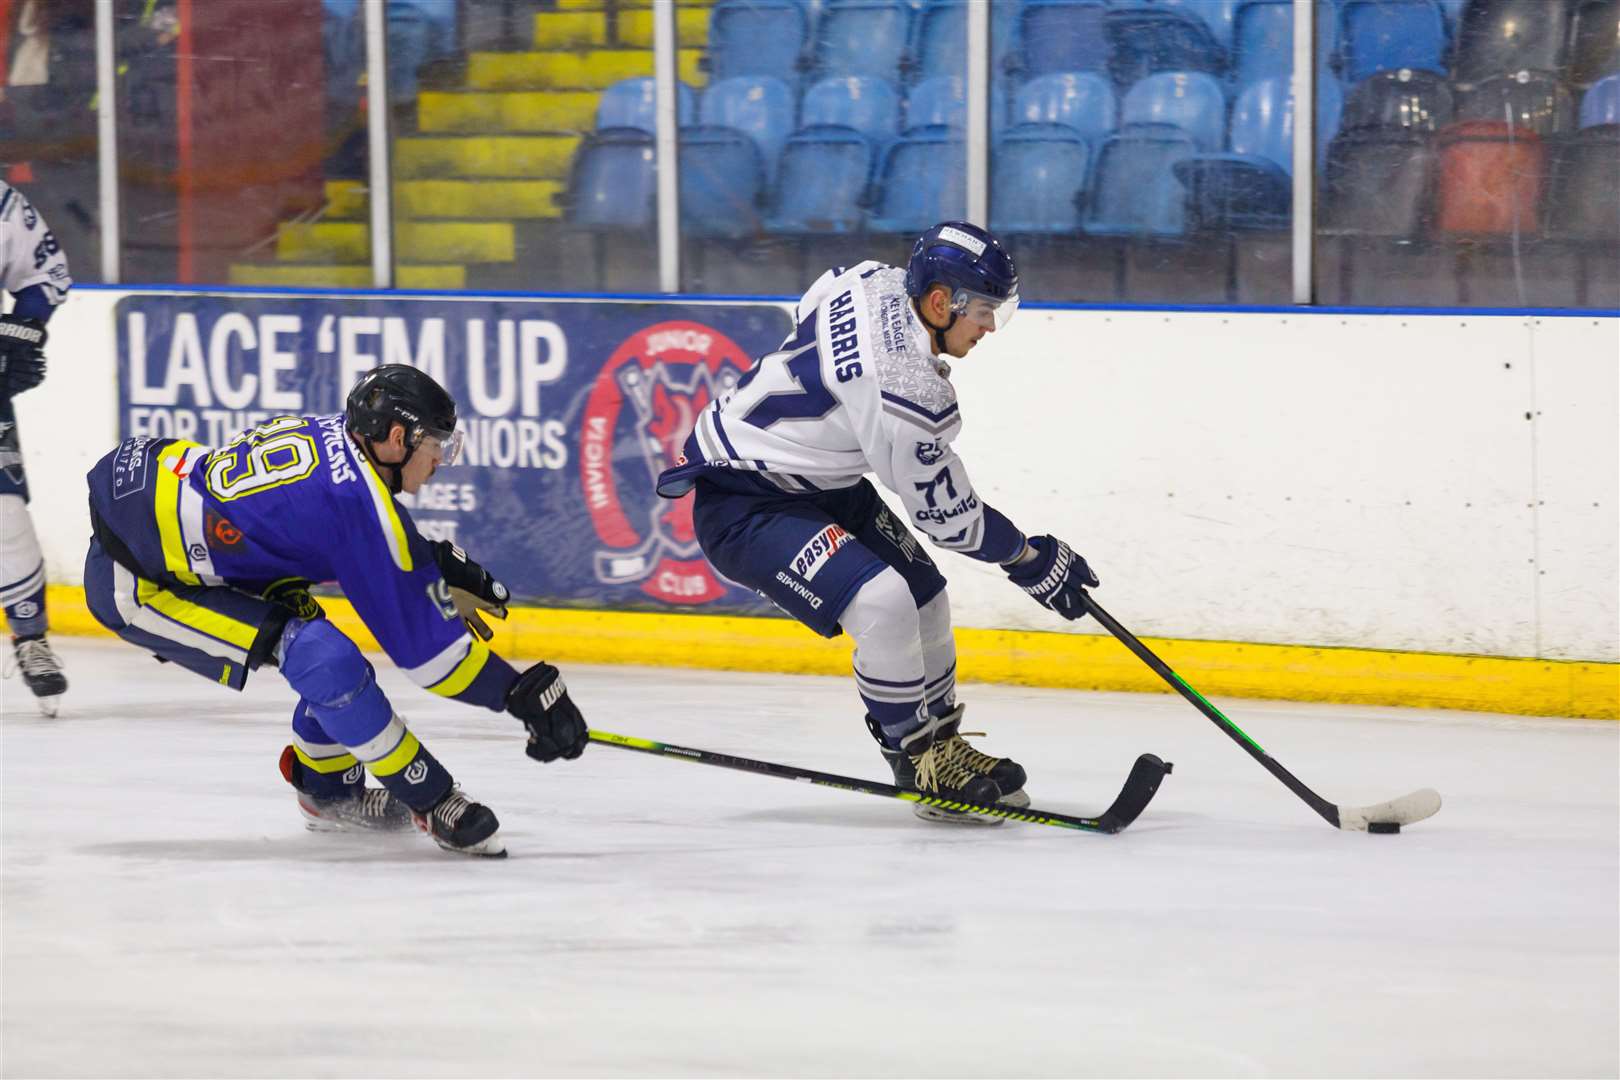 Man-of-the-match Richard Harris goal bound again for Invicta Dynamos against Oxford City Stars Picture: David Trevallion